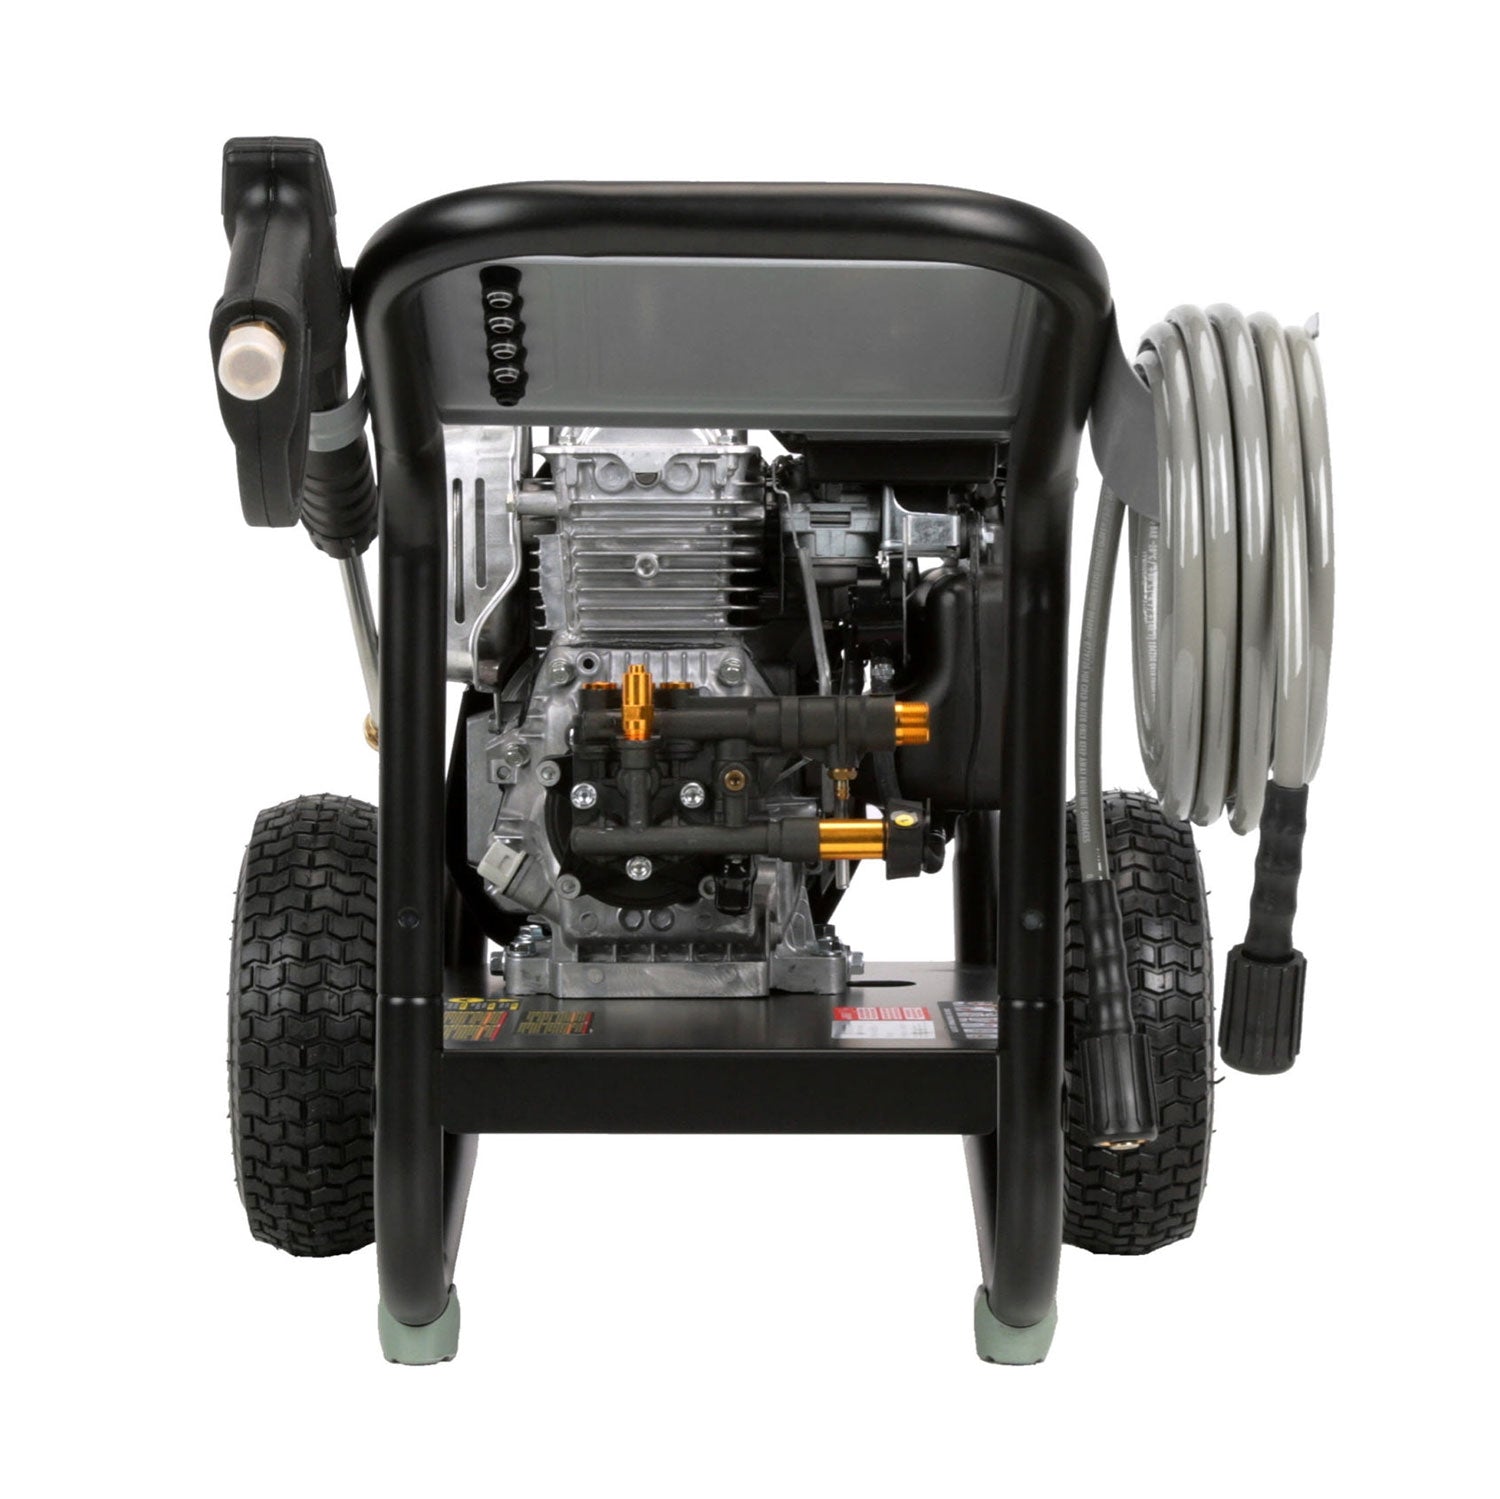 Simpson MSH3125-S MegaShot 3200 PSI @ 2.5 GPM Honda GC190 with Axial Pump Cold Water Gas Engine Pressure Washer